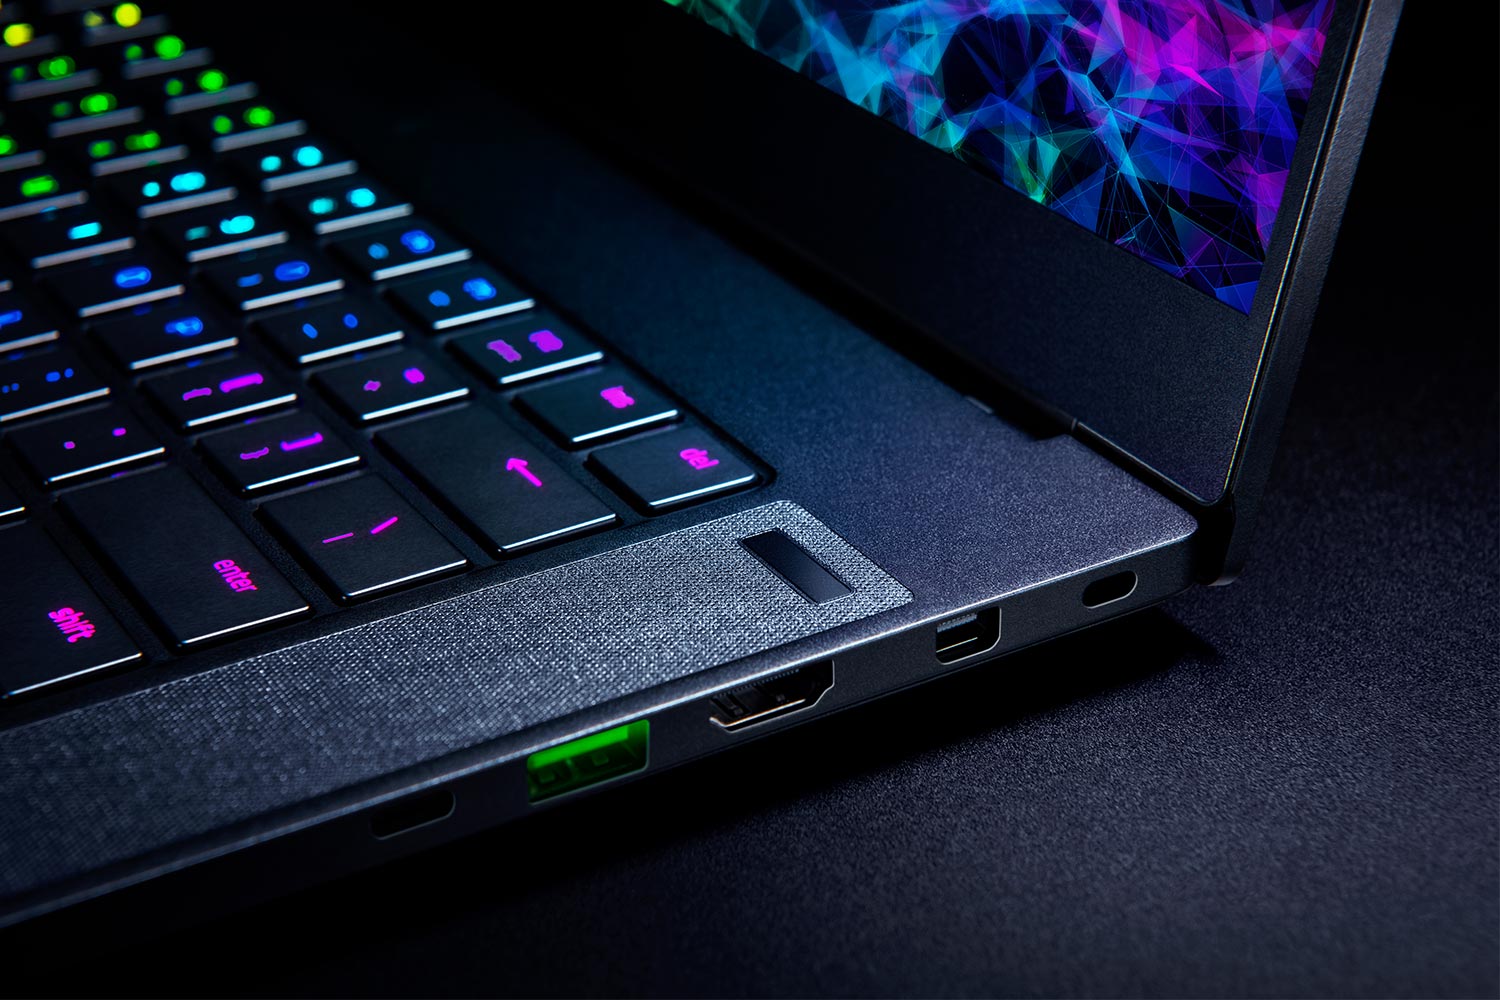 IFA 2019: The New Razer Blade 15 Gaming Laptop Is Ultra-Compact, Ultra Fast And Ultra Powerful